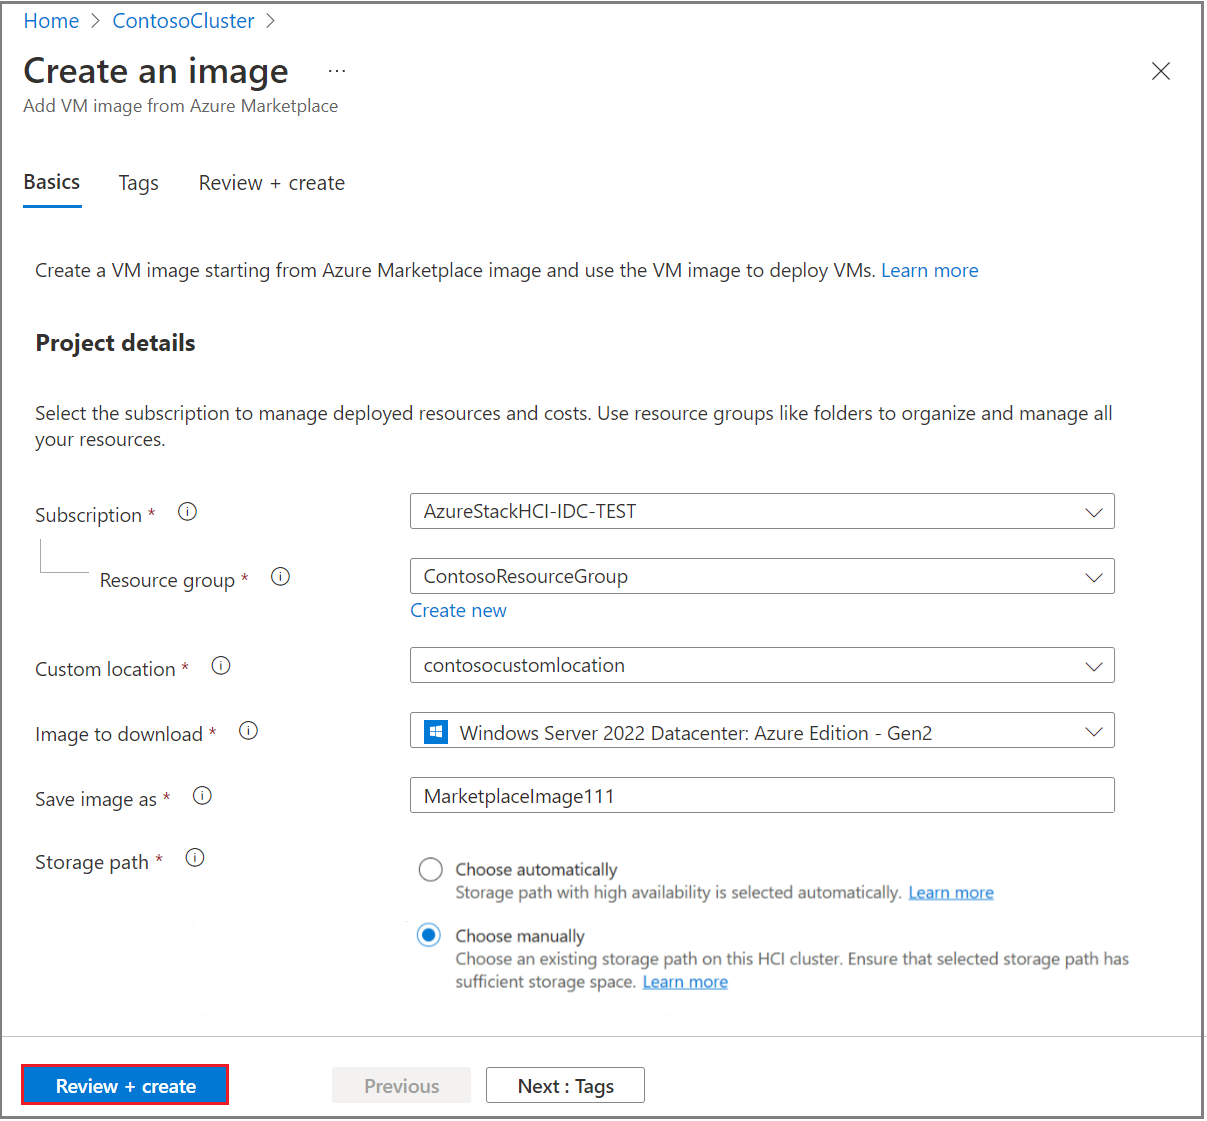 Screenshot of the Create an Image page highlighting the Review + Create button.